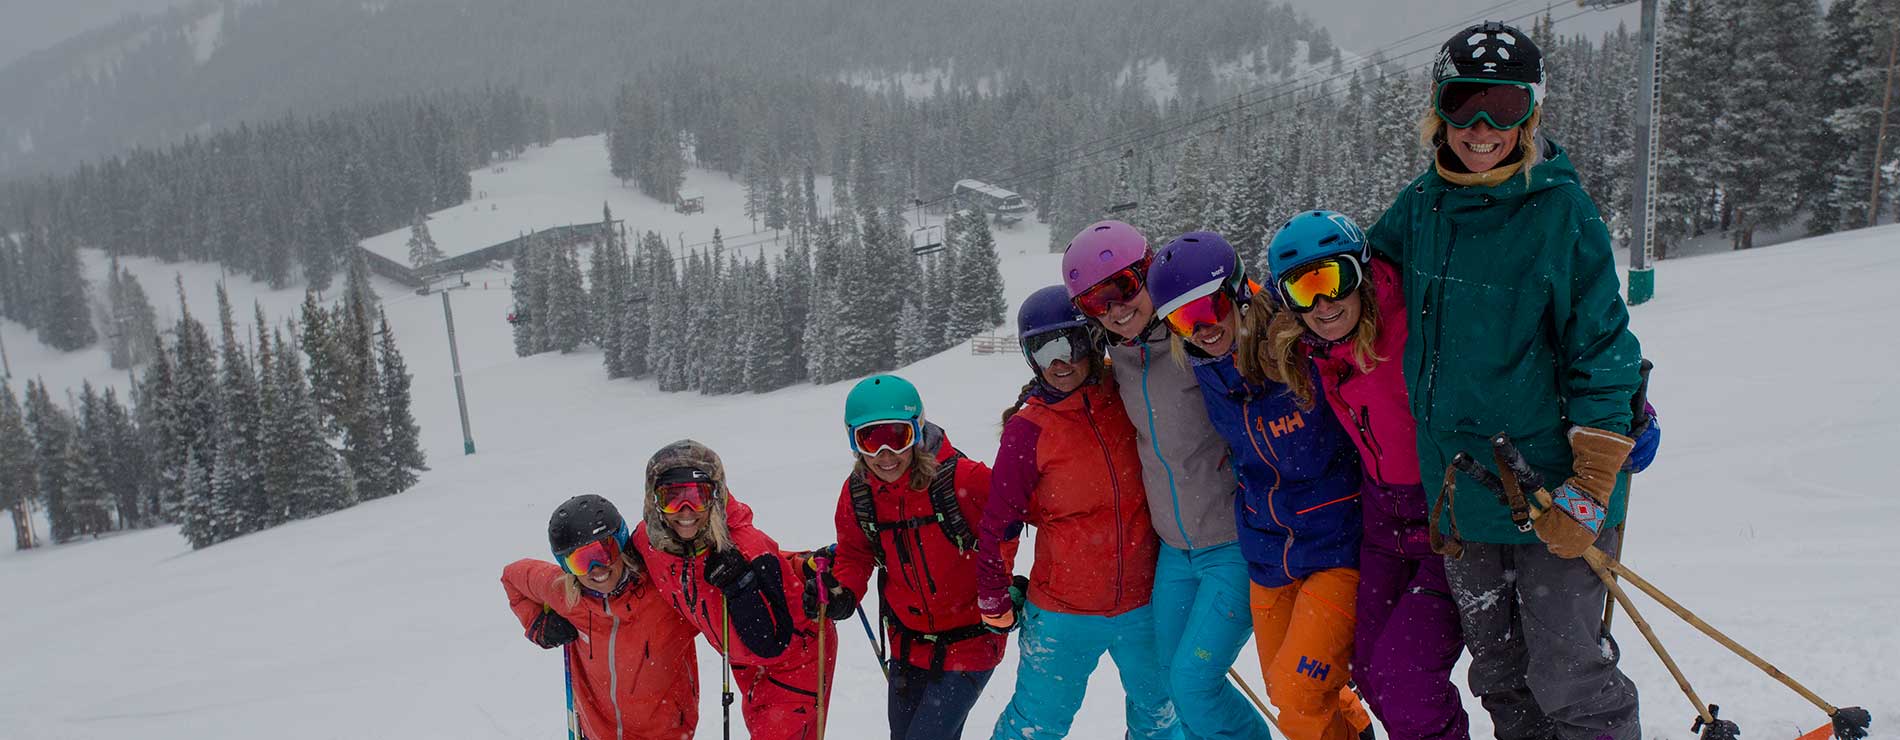 Snow Fashion in Aspen - Colorado Expression Magazine - The Best of